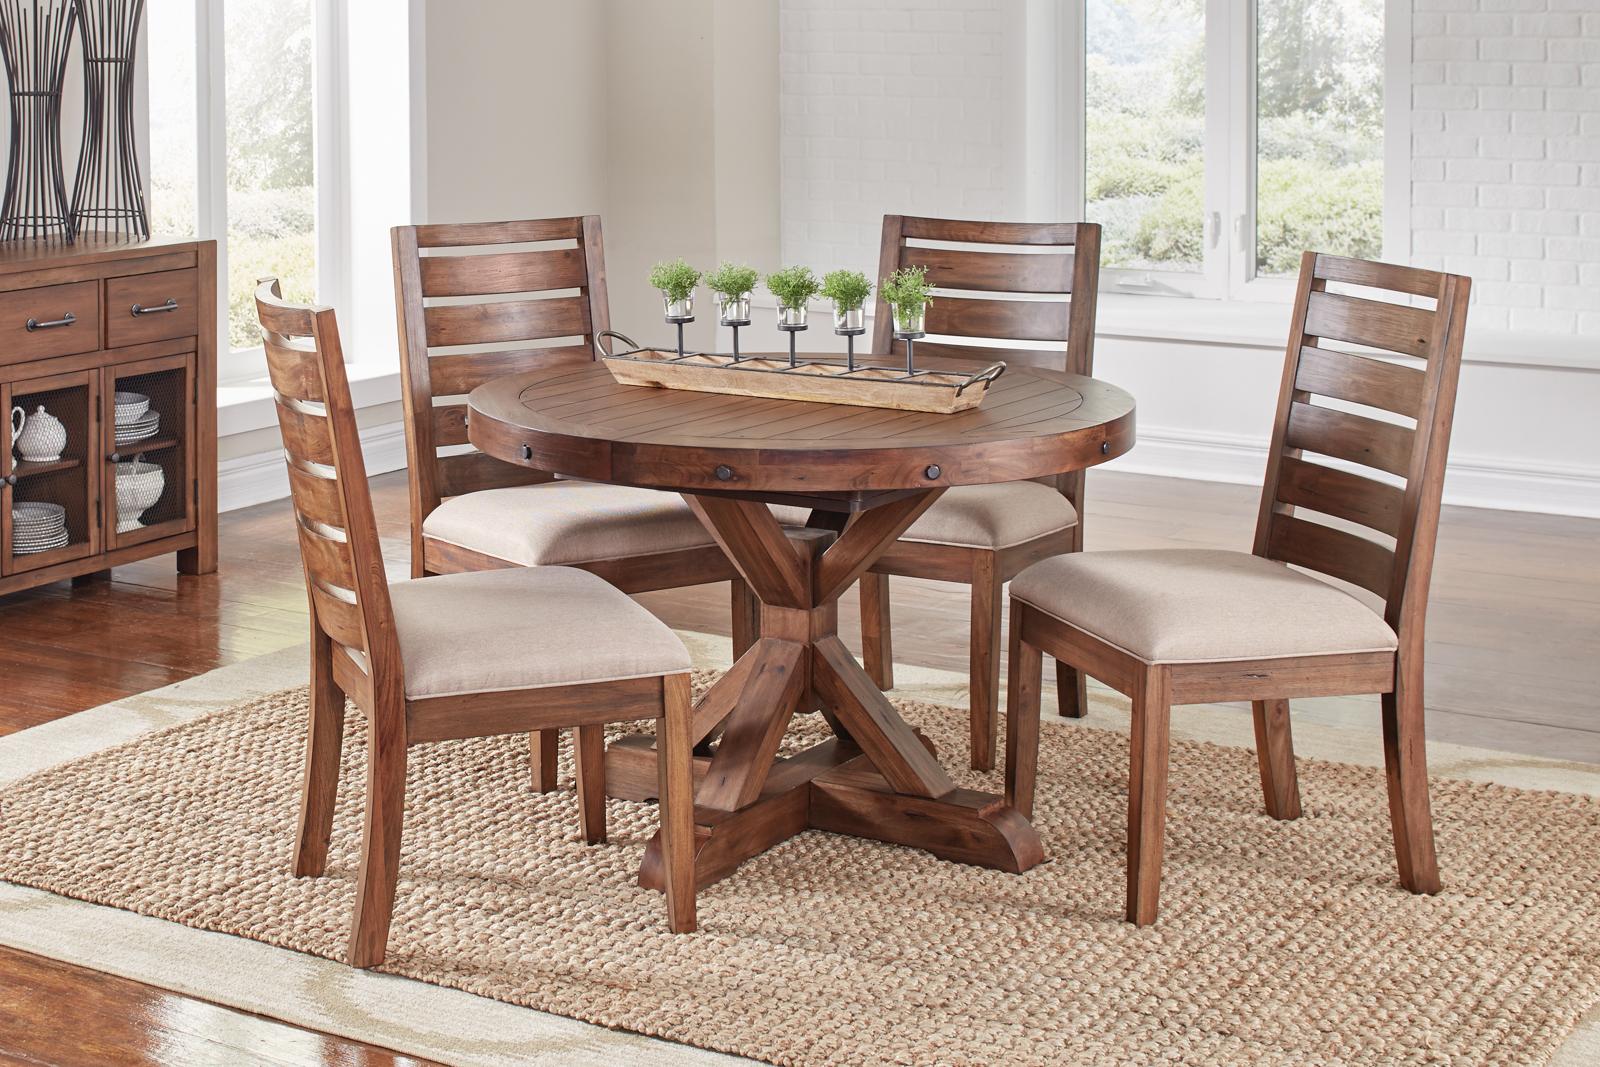 A America Anacortes Dining Table